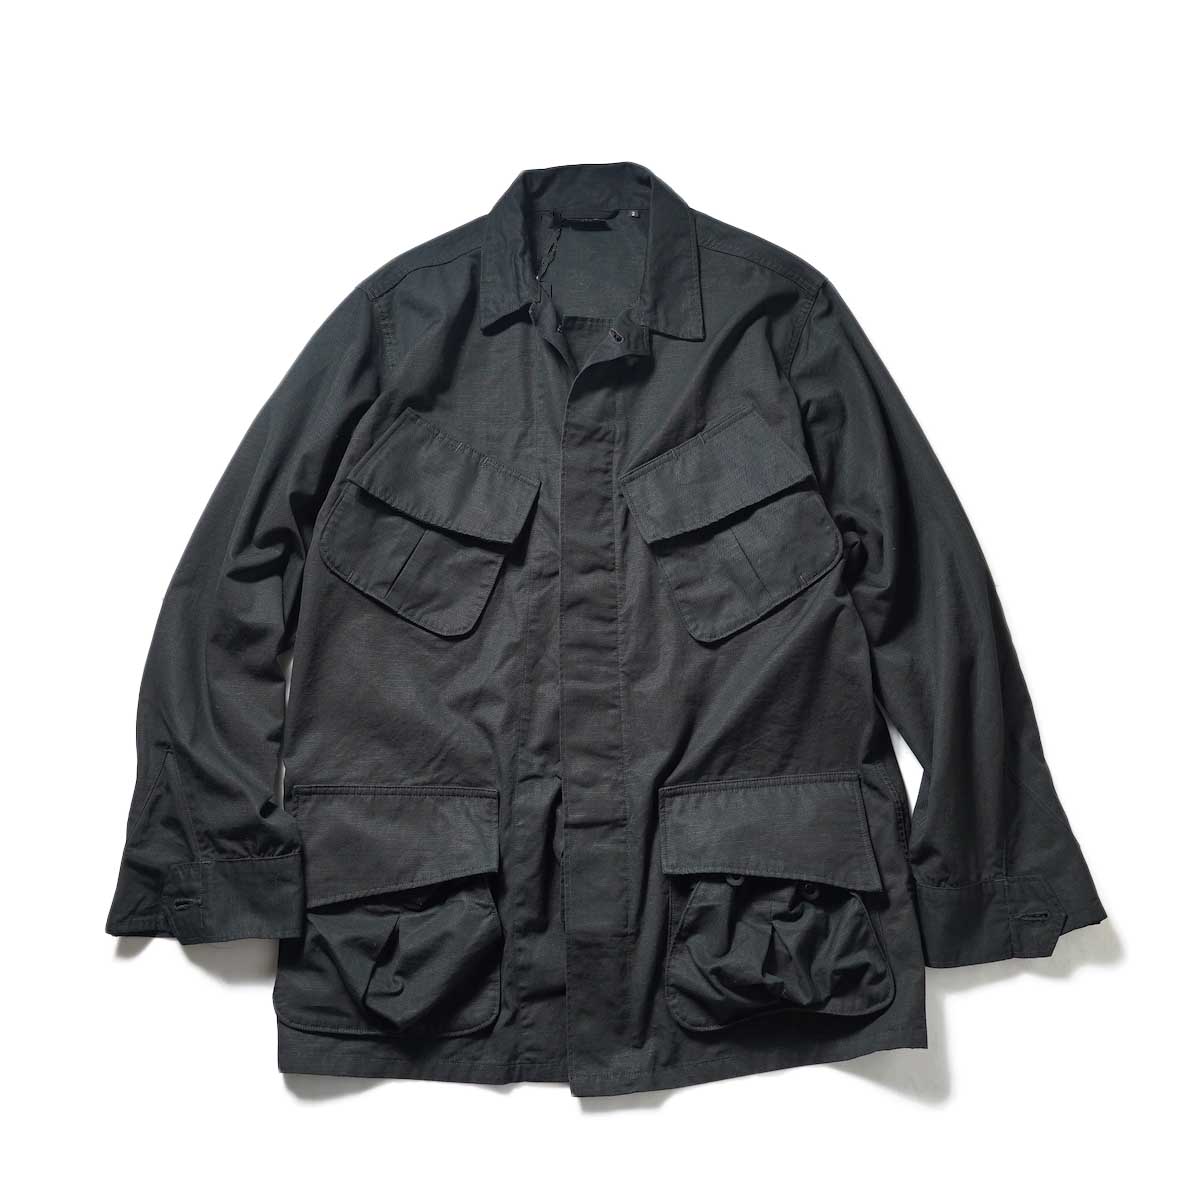 orSlow / US Army Tropical Jacket (Black Rip Stop)